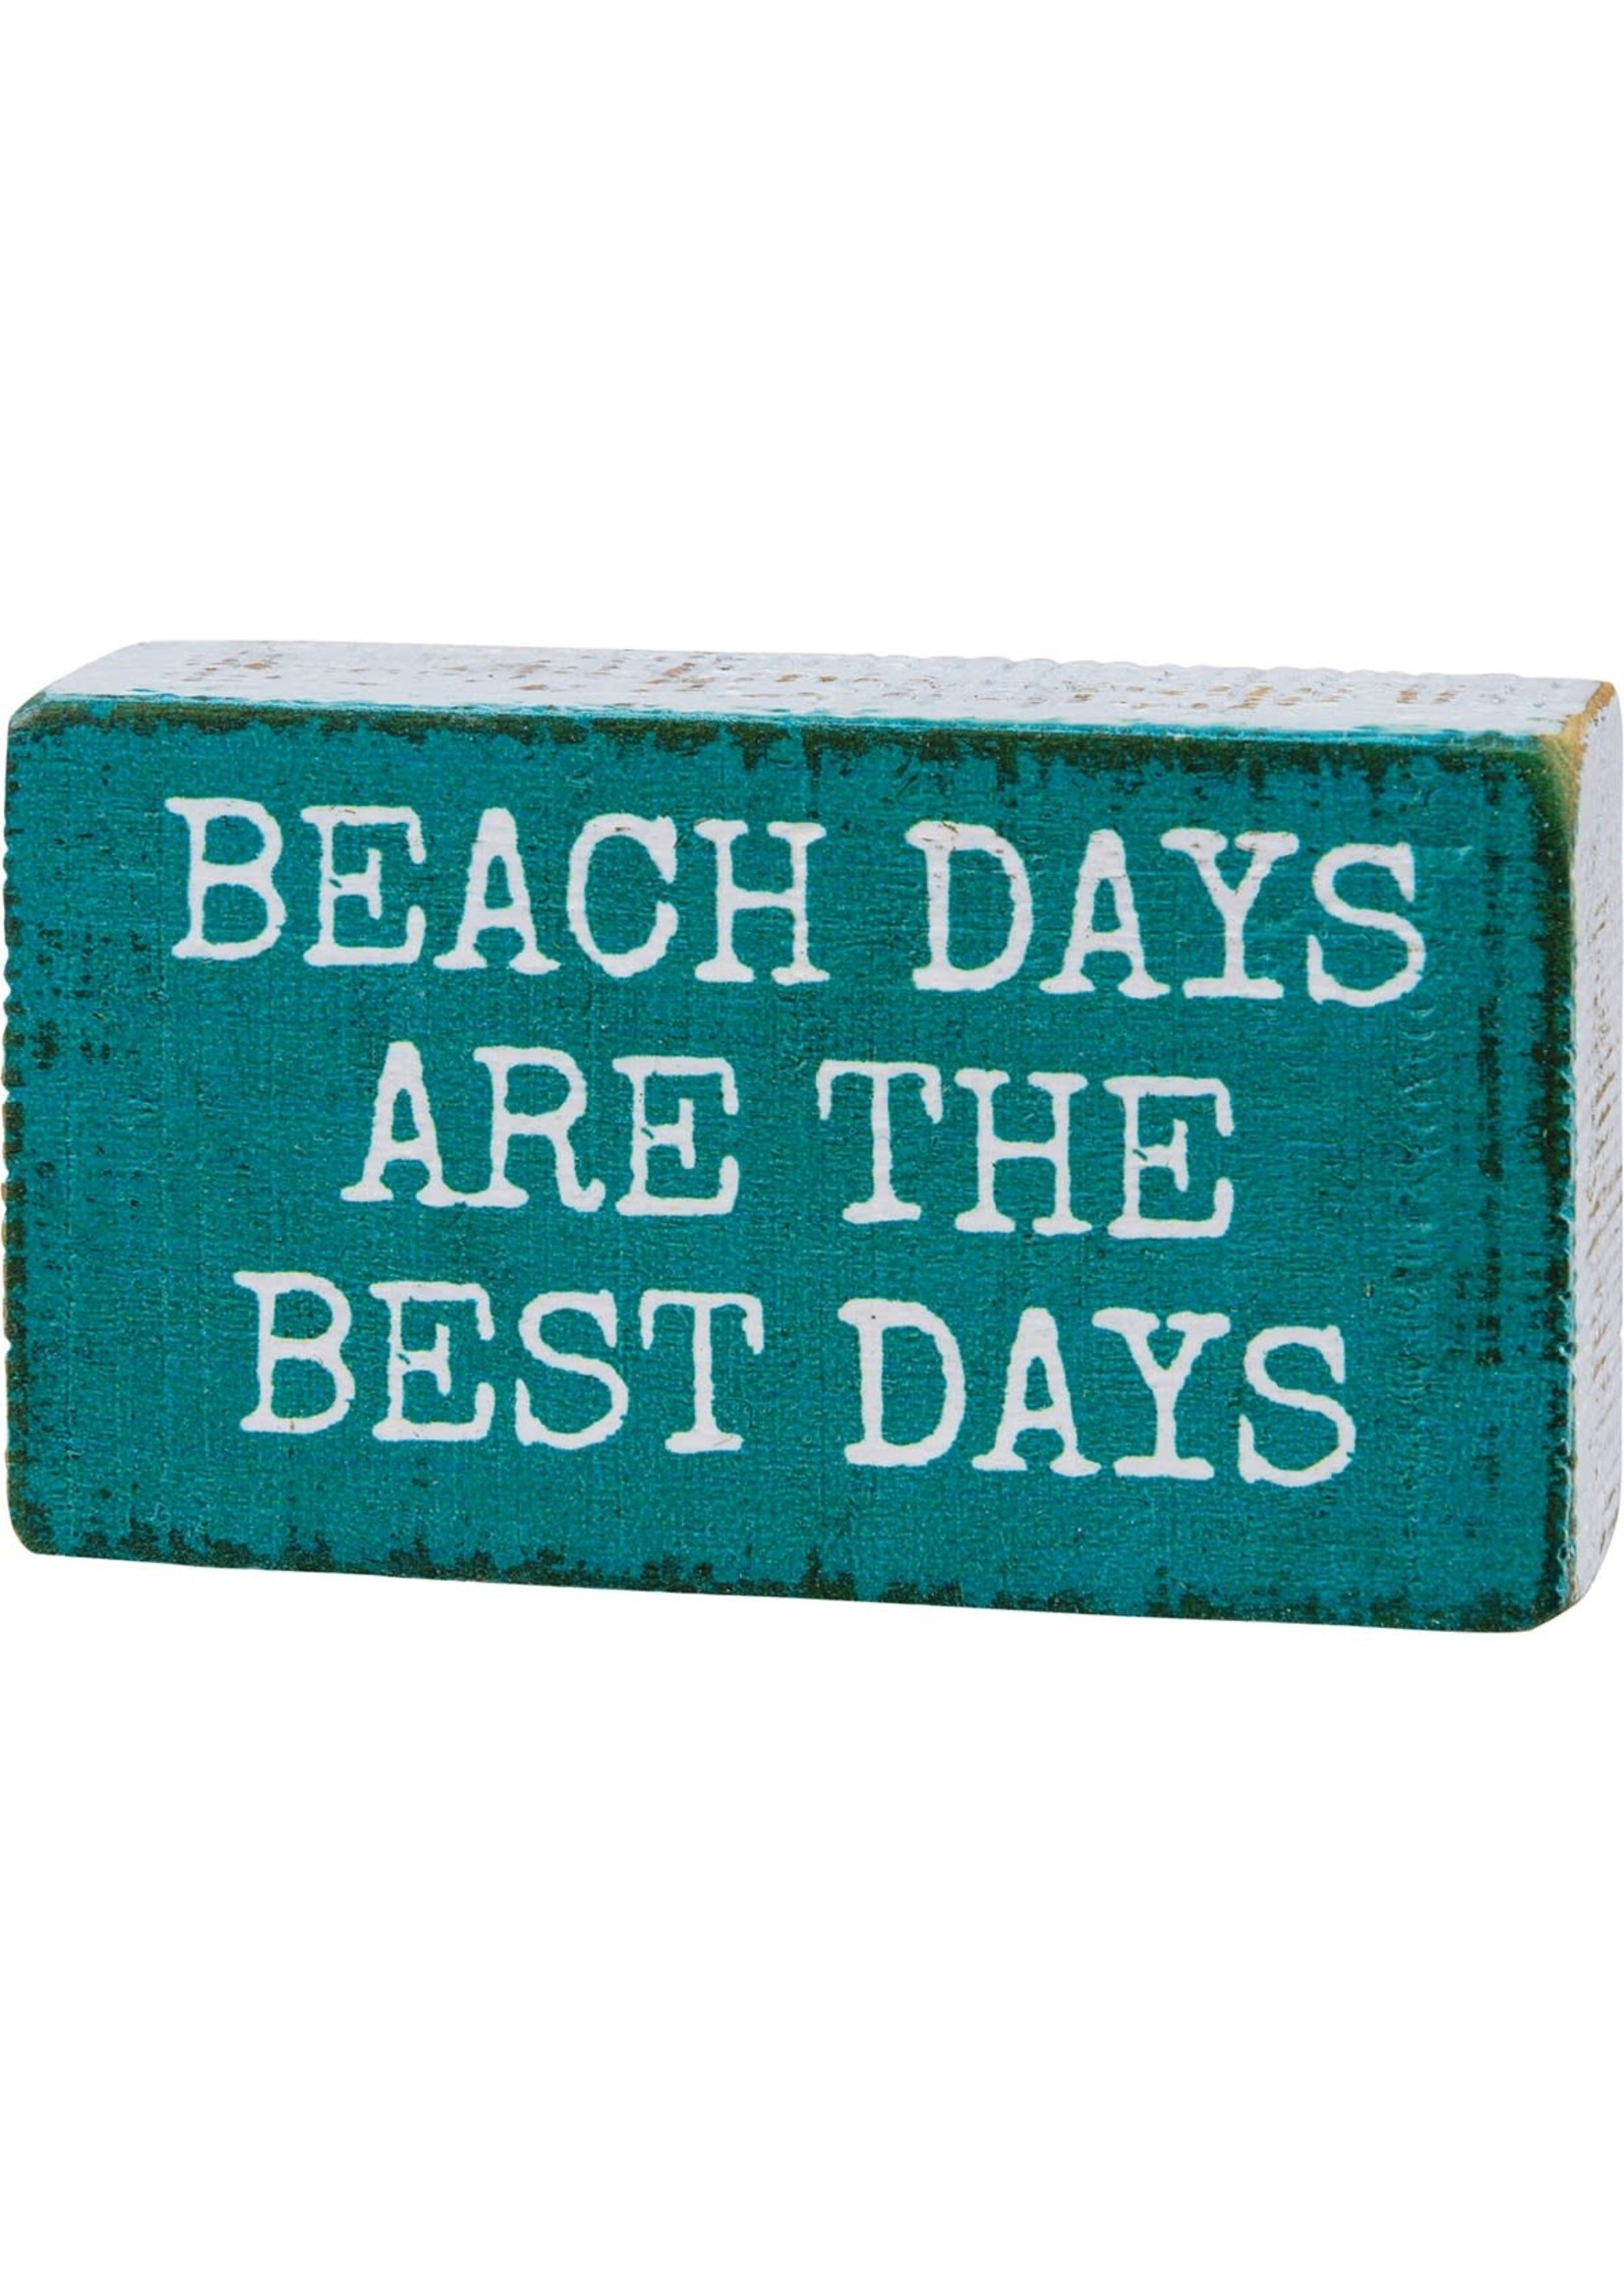 Primitives by Kathy Block Sign - Beach Days